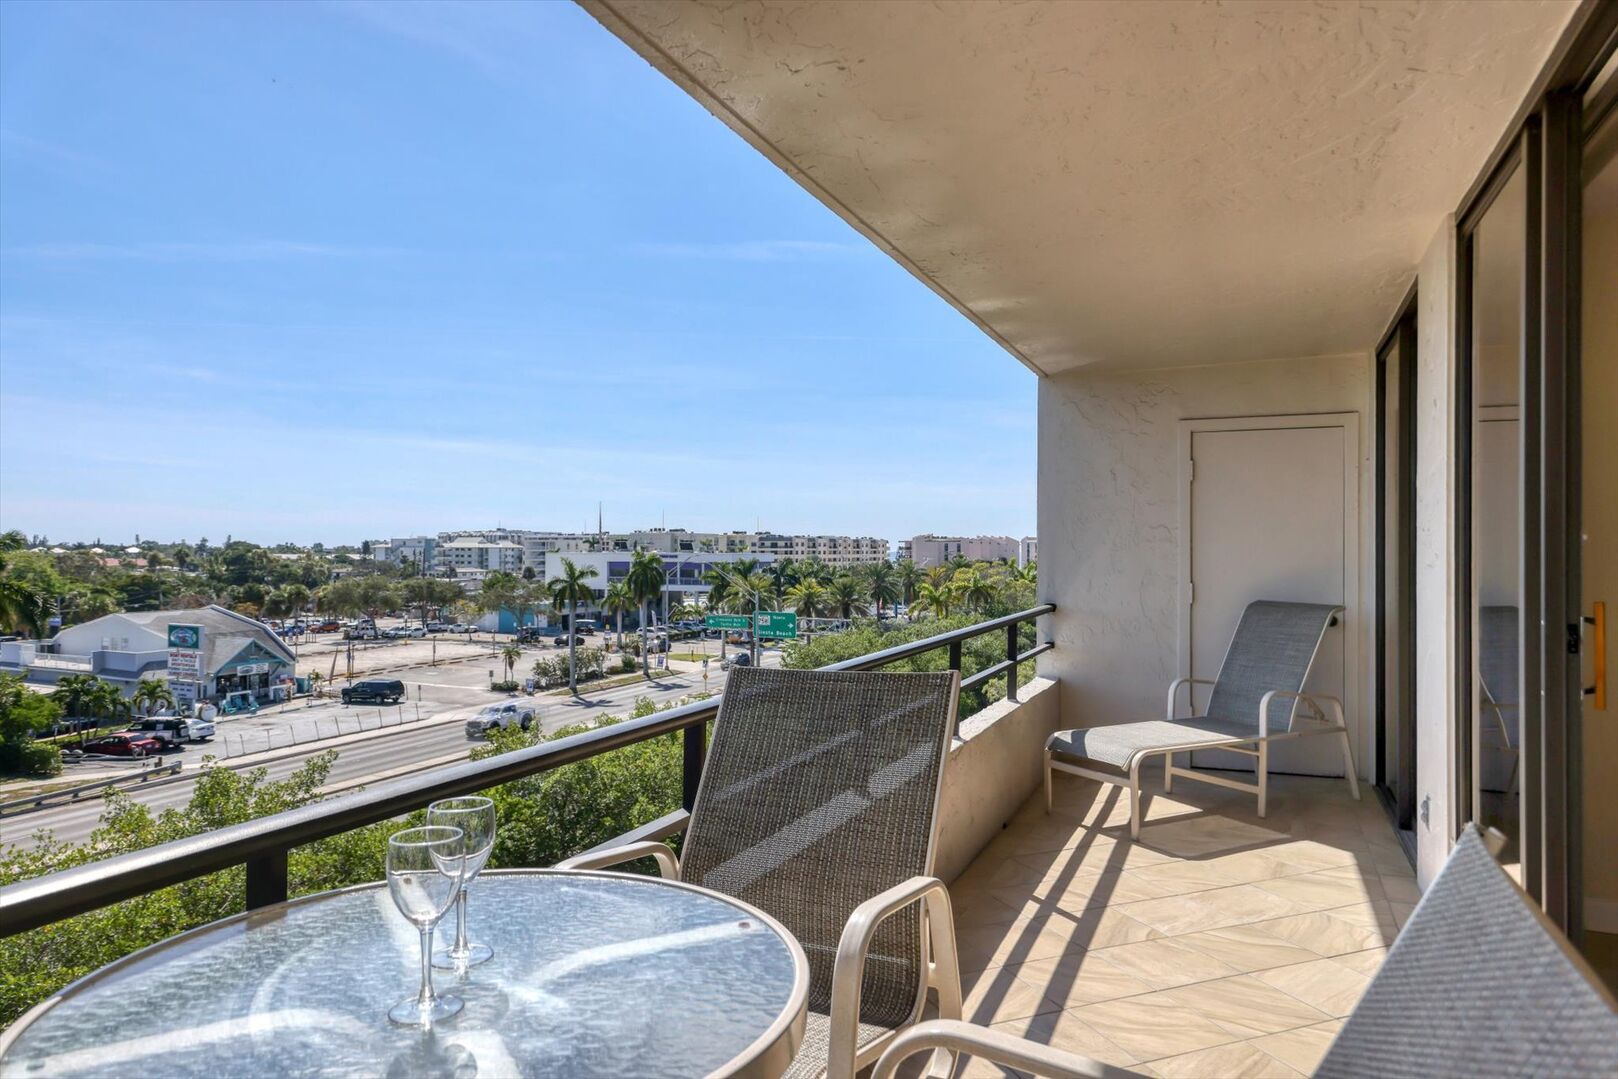 Large balcony with outdoor dining and lounge chairs for soaking up the Florida sun!